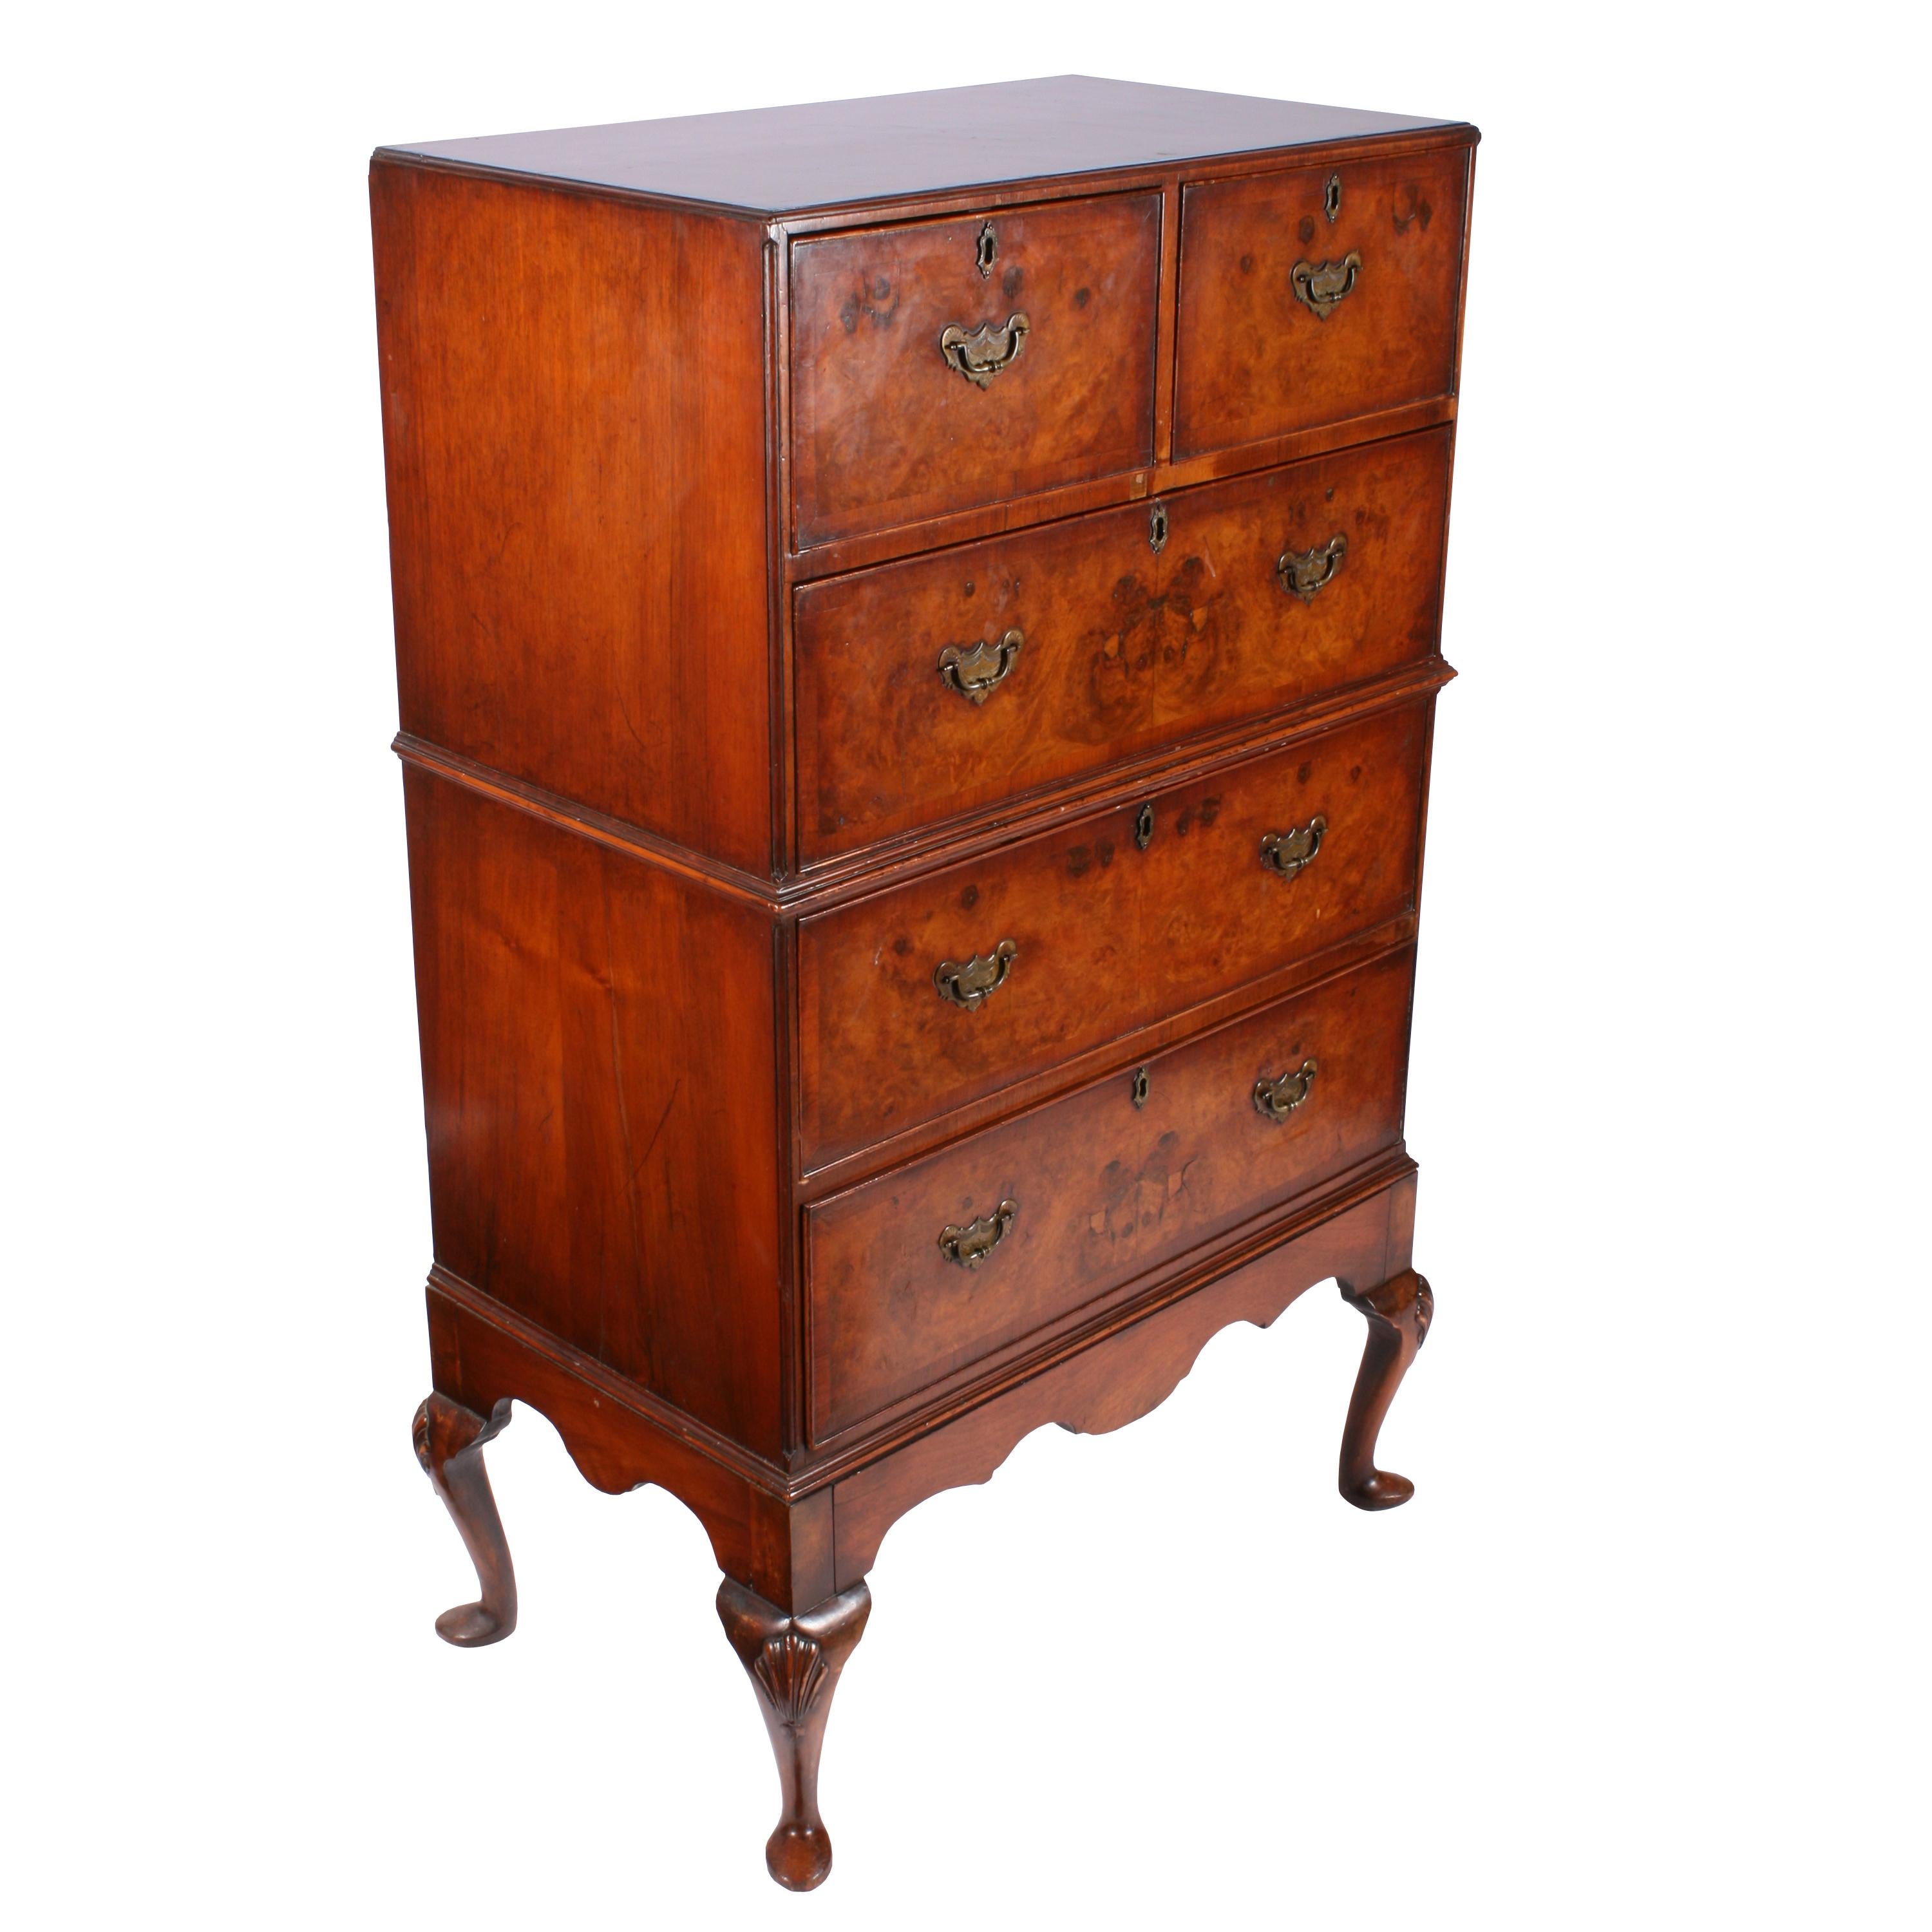 A late 19th-early 20th century walnut chest on stand.

This 18th century style chest has cabriole legs with carved shells on the knees.

The chest has two shortdrawers over three graduated long drawers with a shaped moulding half way up.

The